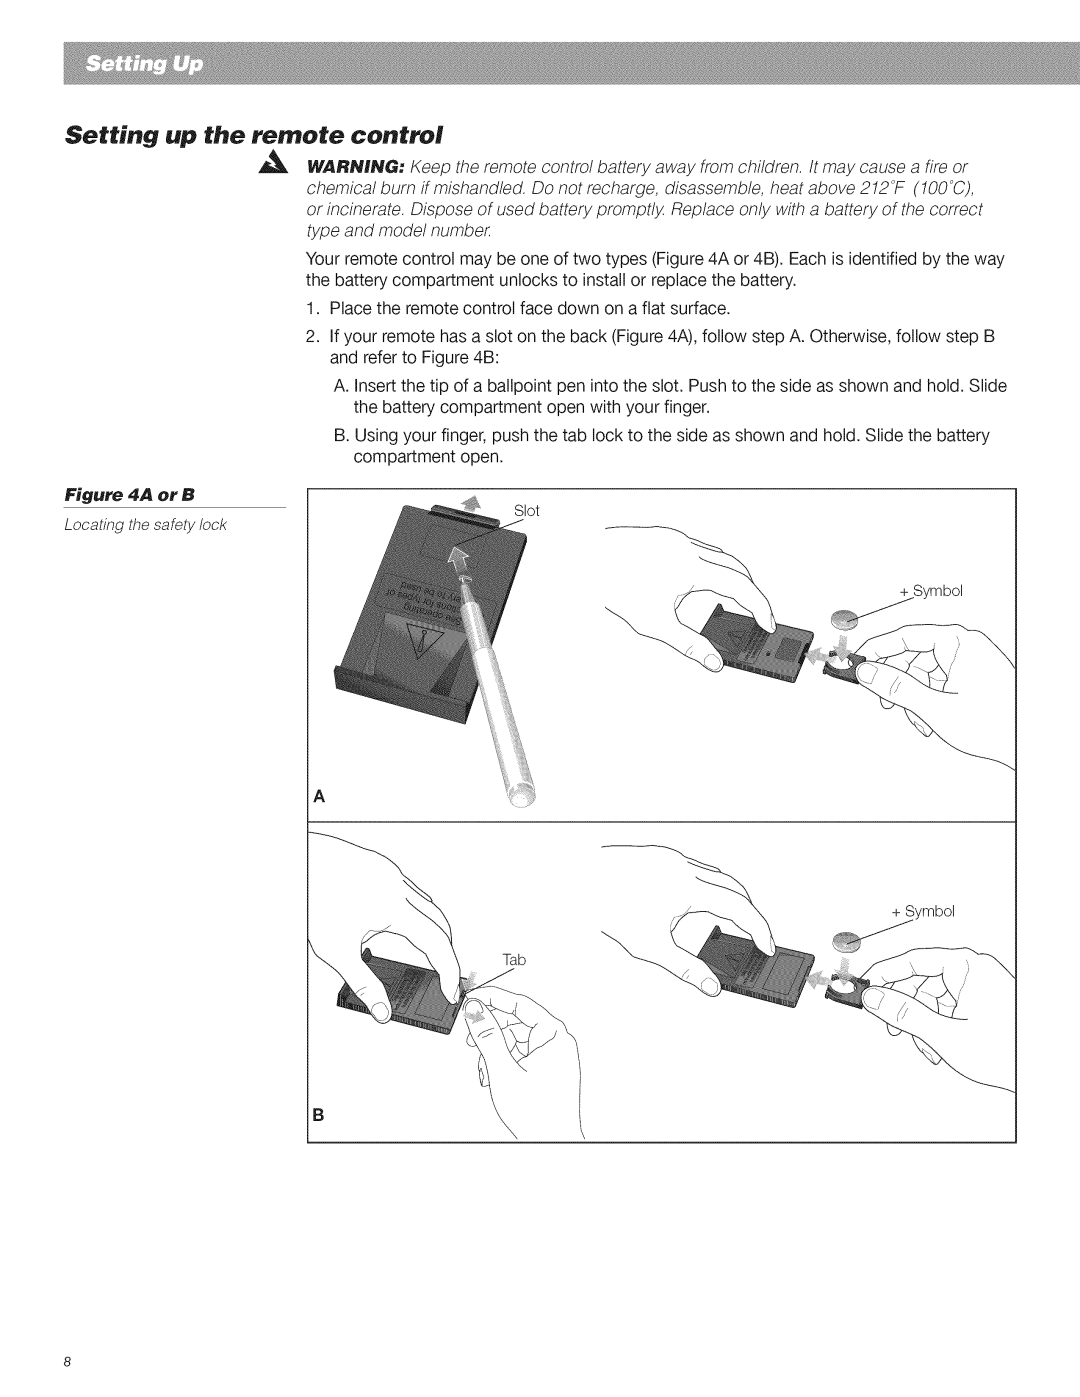 Bose CD Player manual Setting up the remote control, A or B 